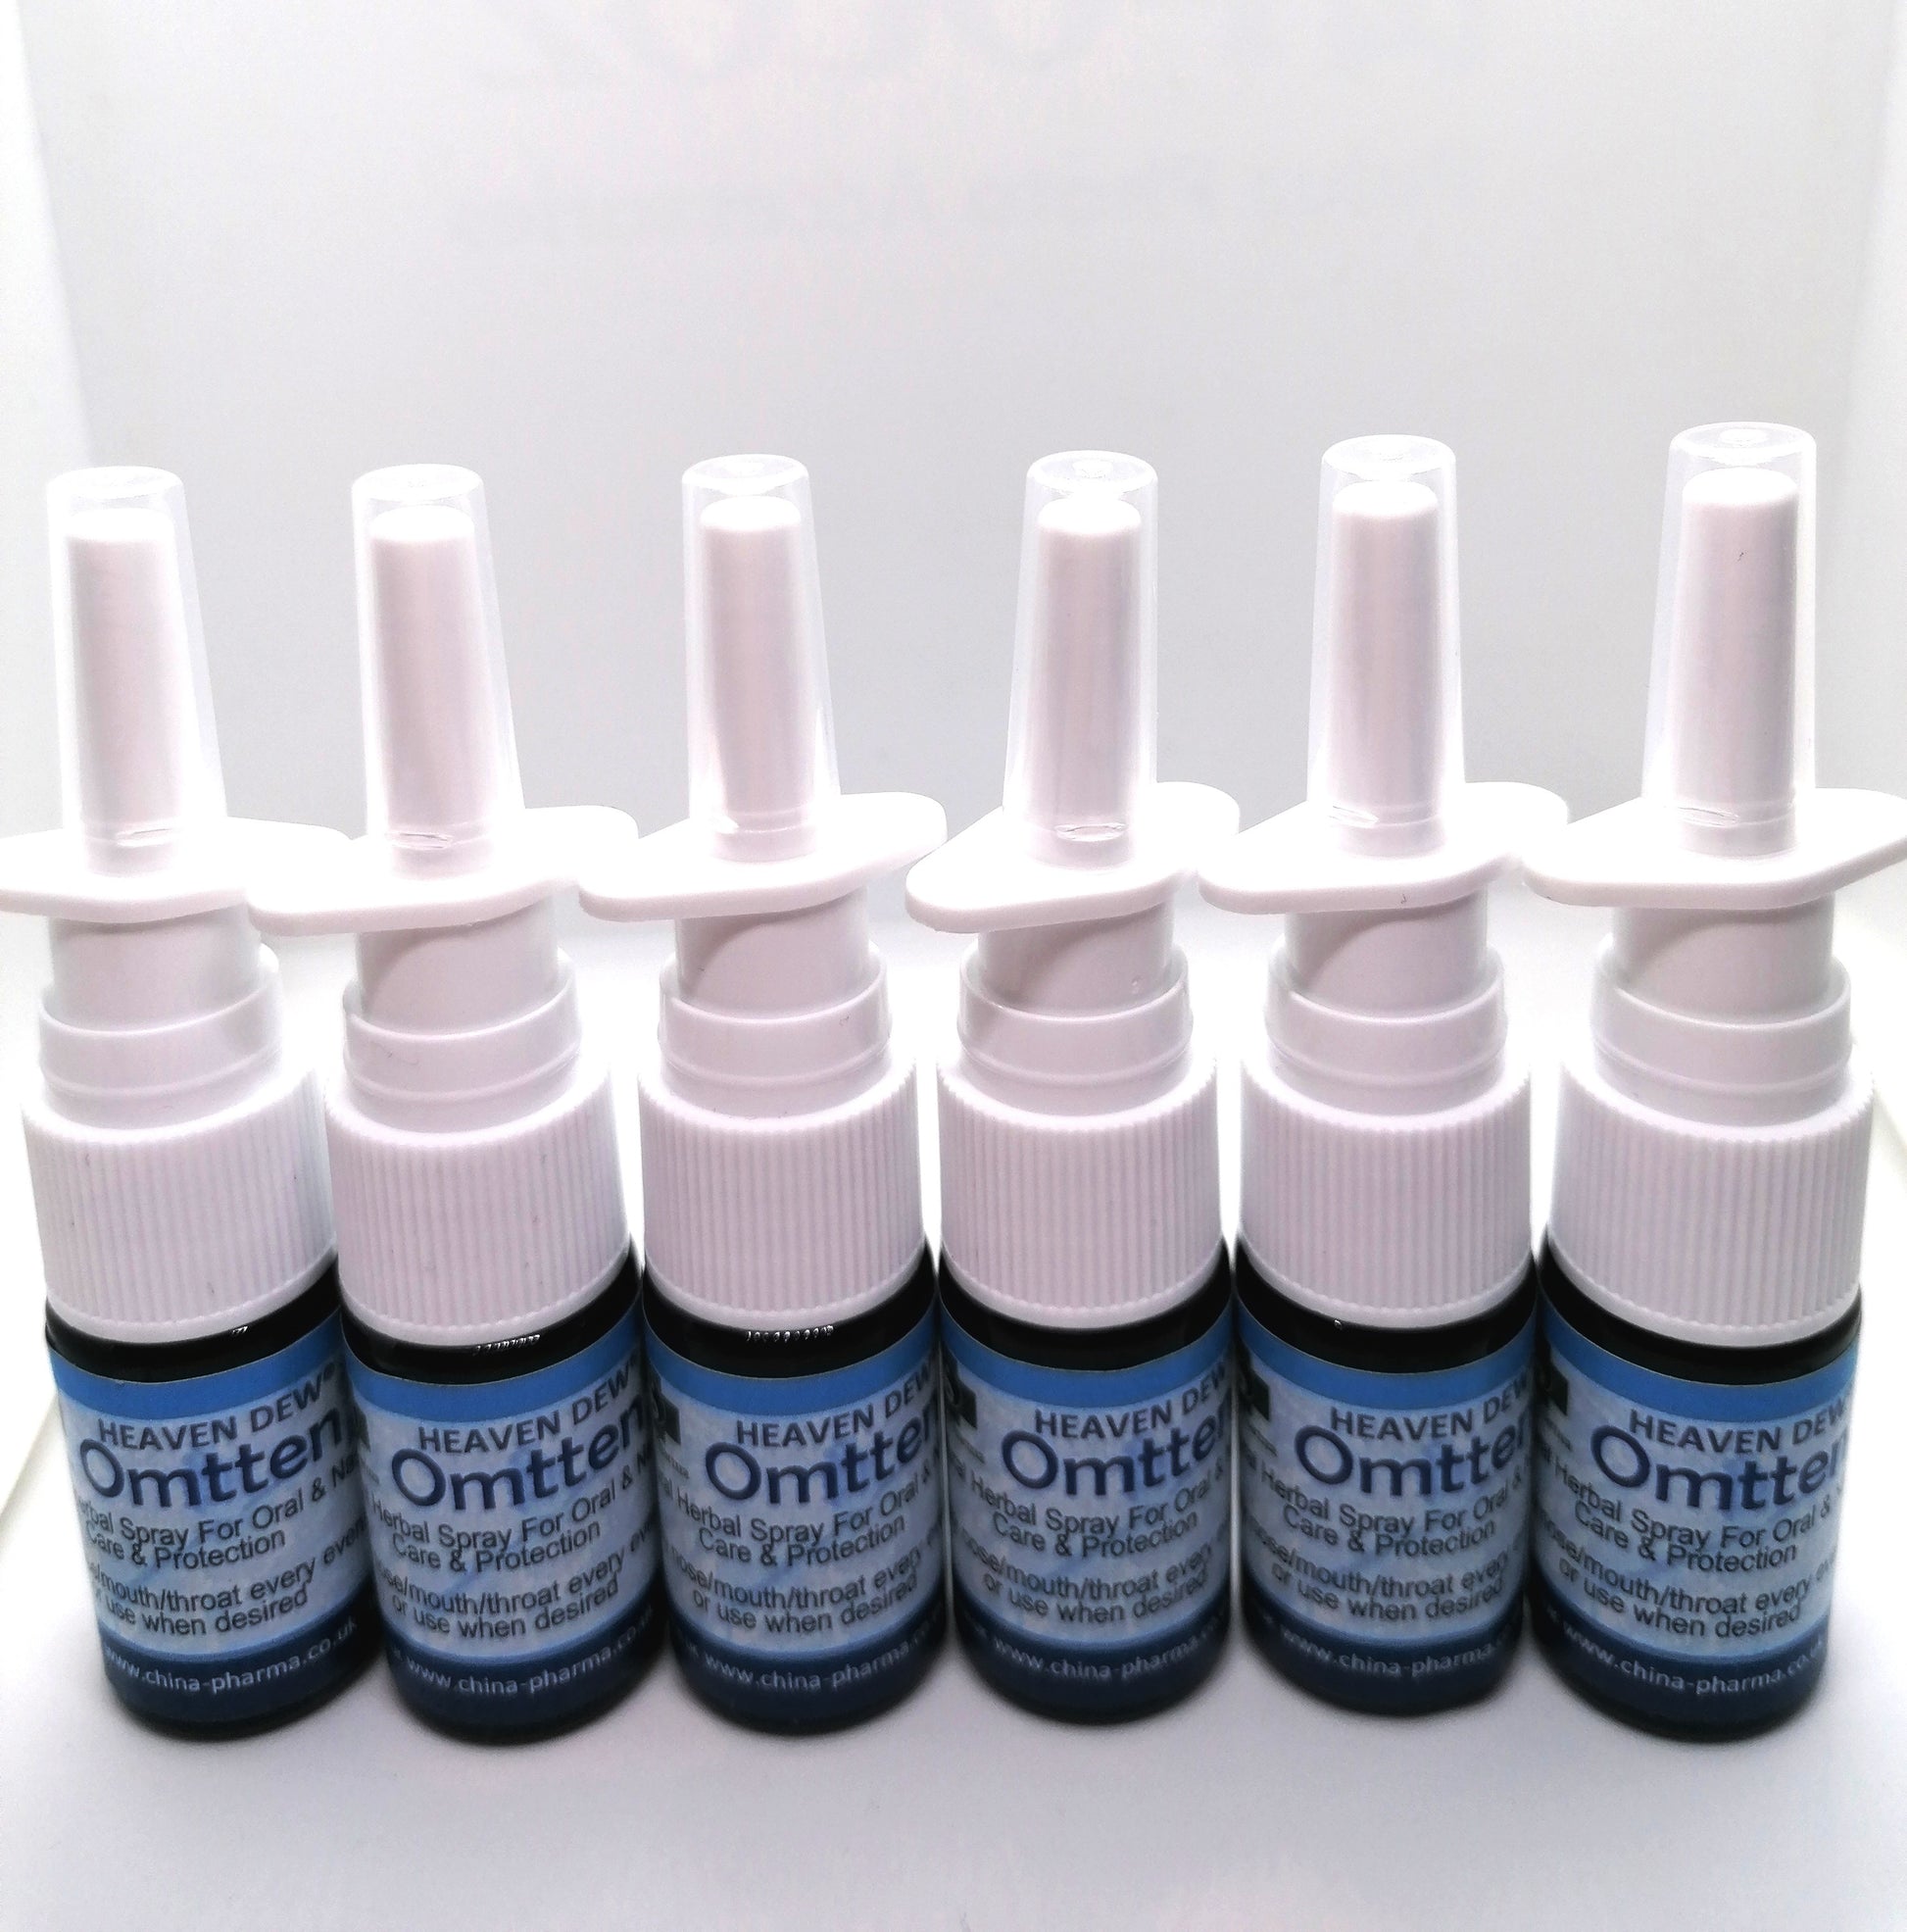 Bad Breath Halitosis Treatment Natural Herbal Spray 6 Pack  60 Day Supply Oral Mouth Spray 